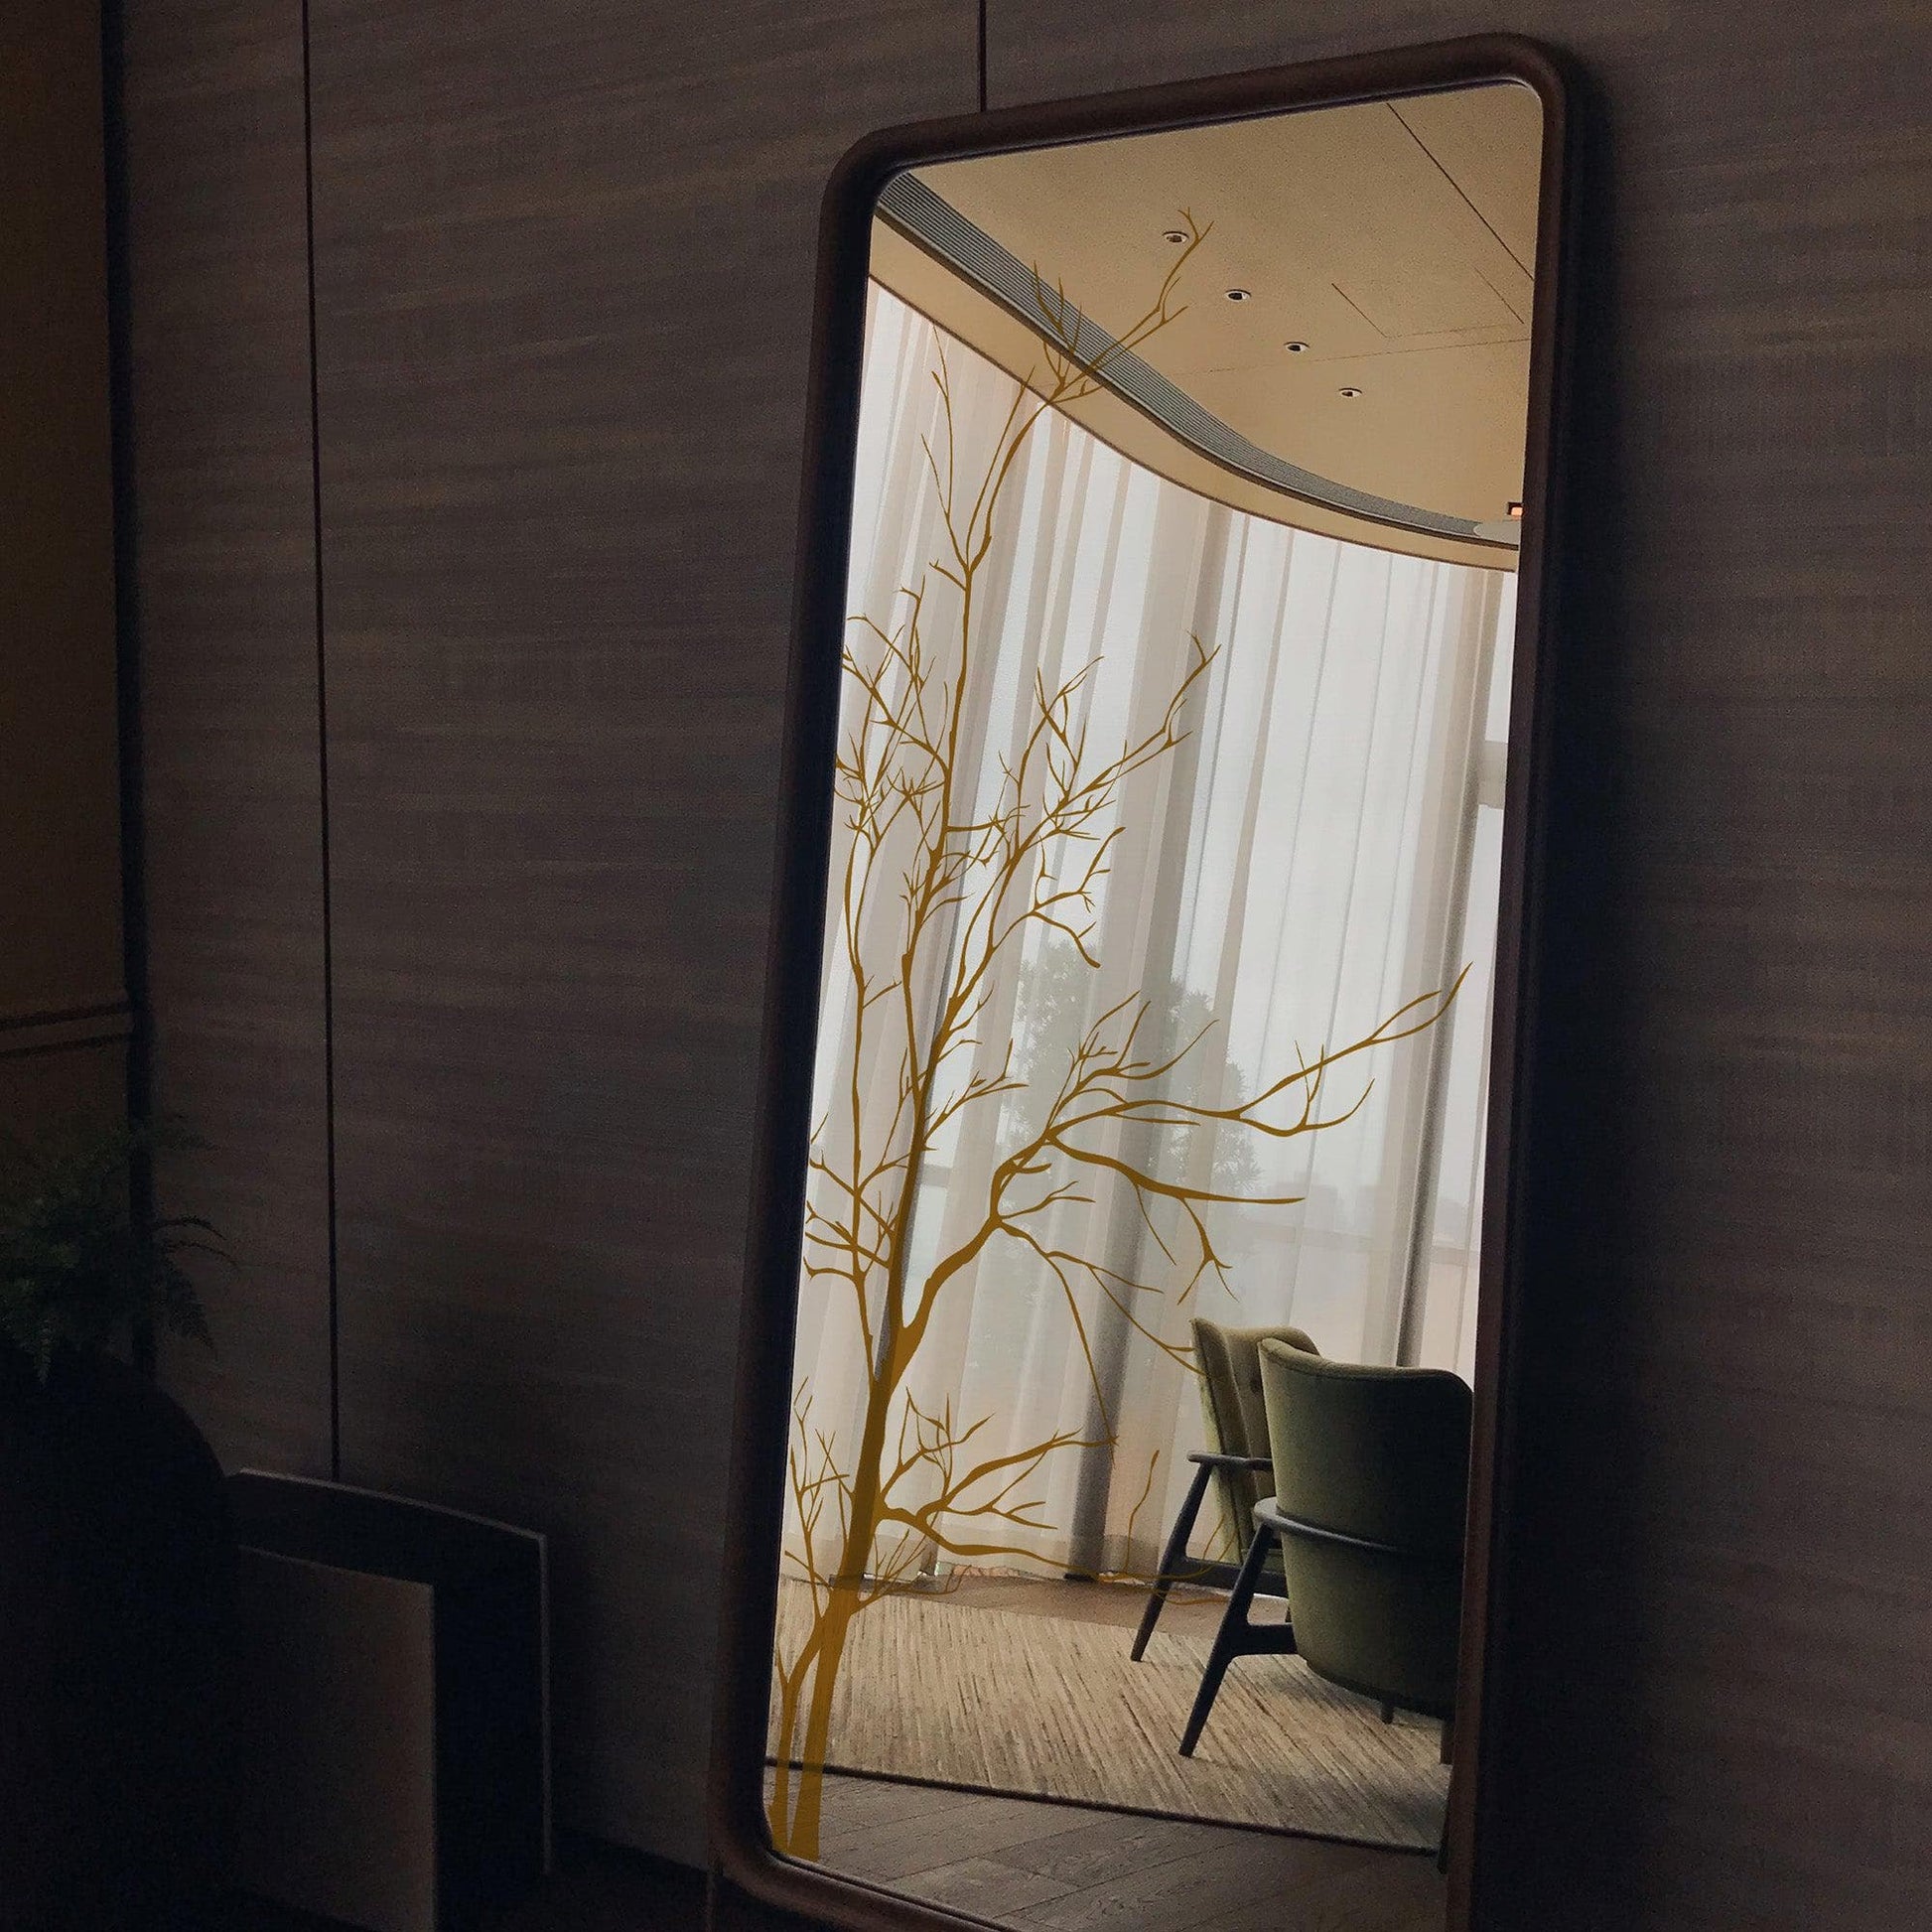 A gold tree decal on a mirror surface in a living room.